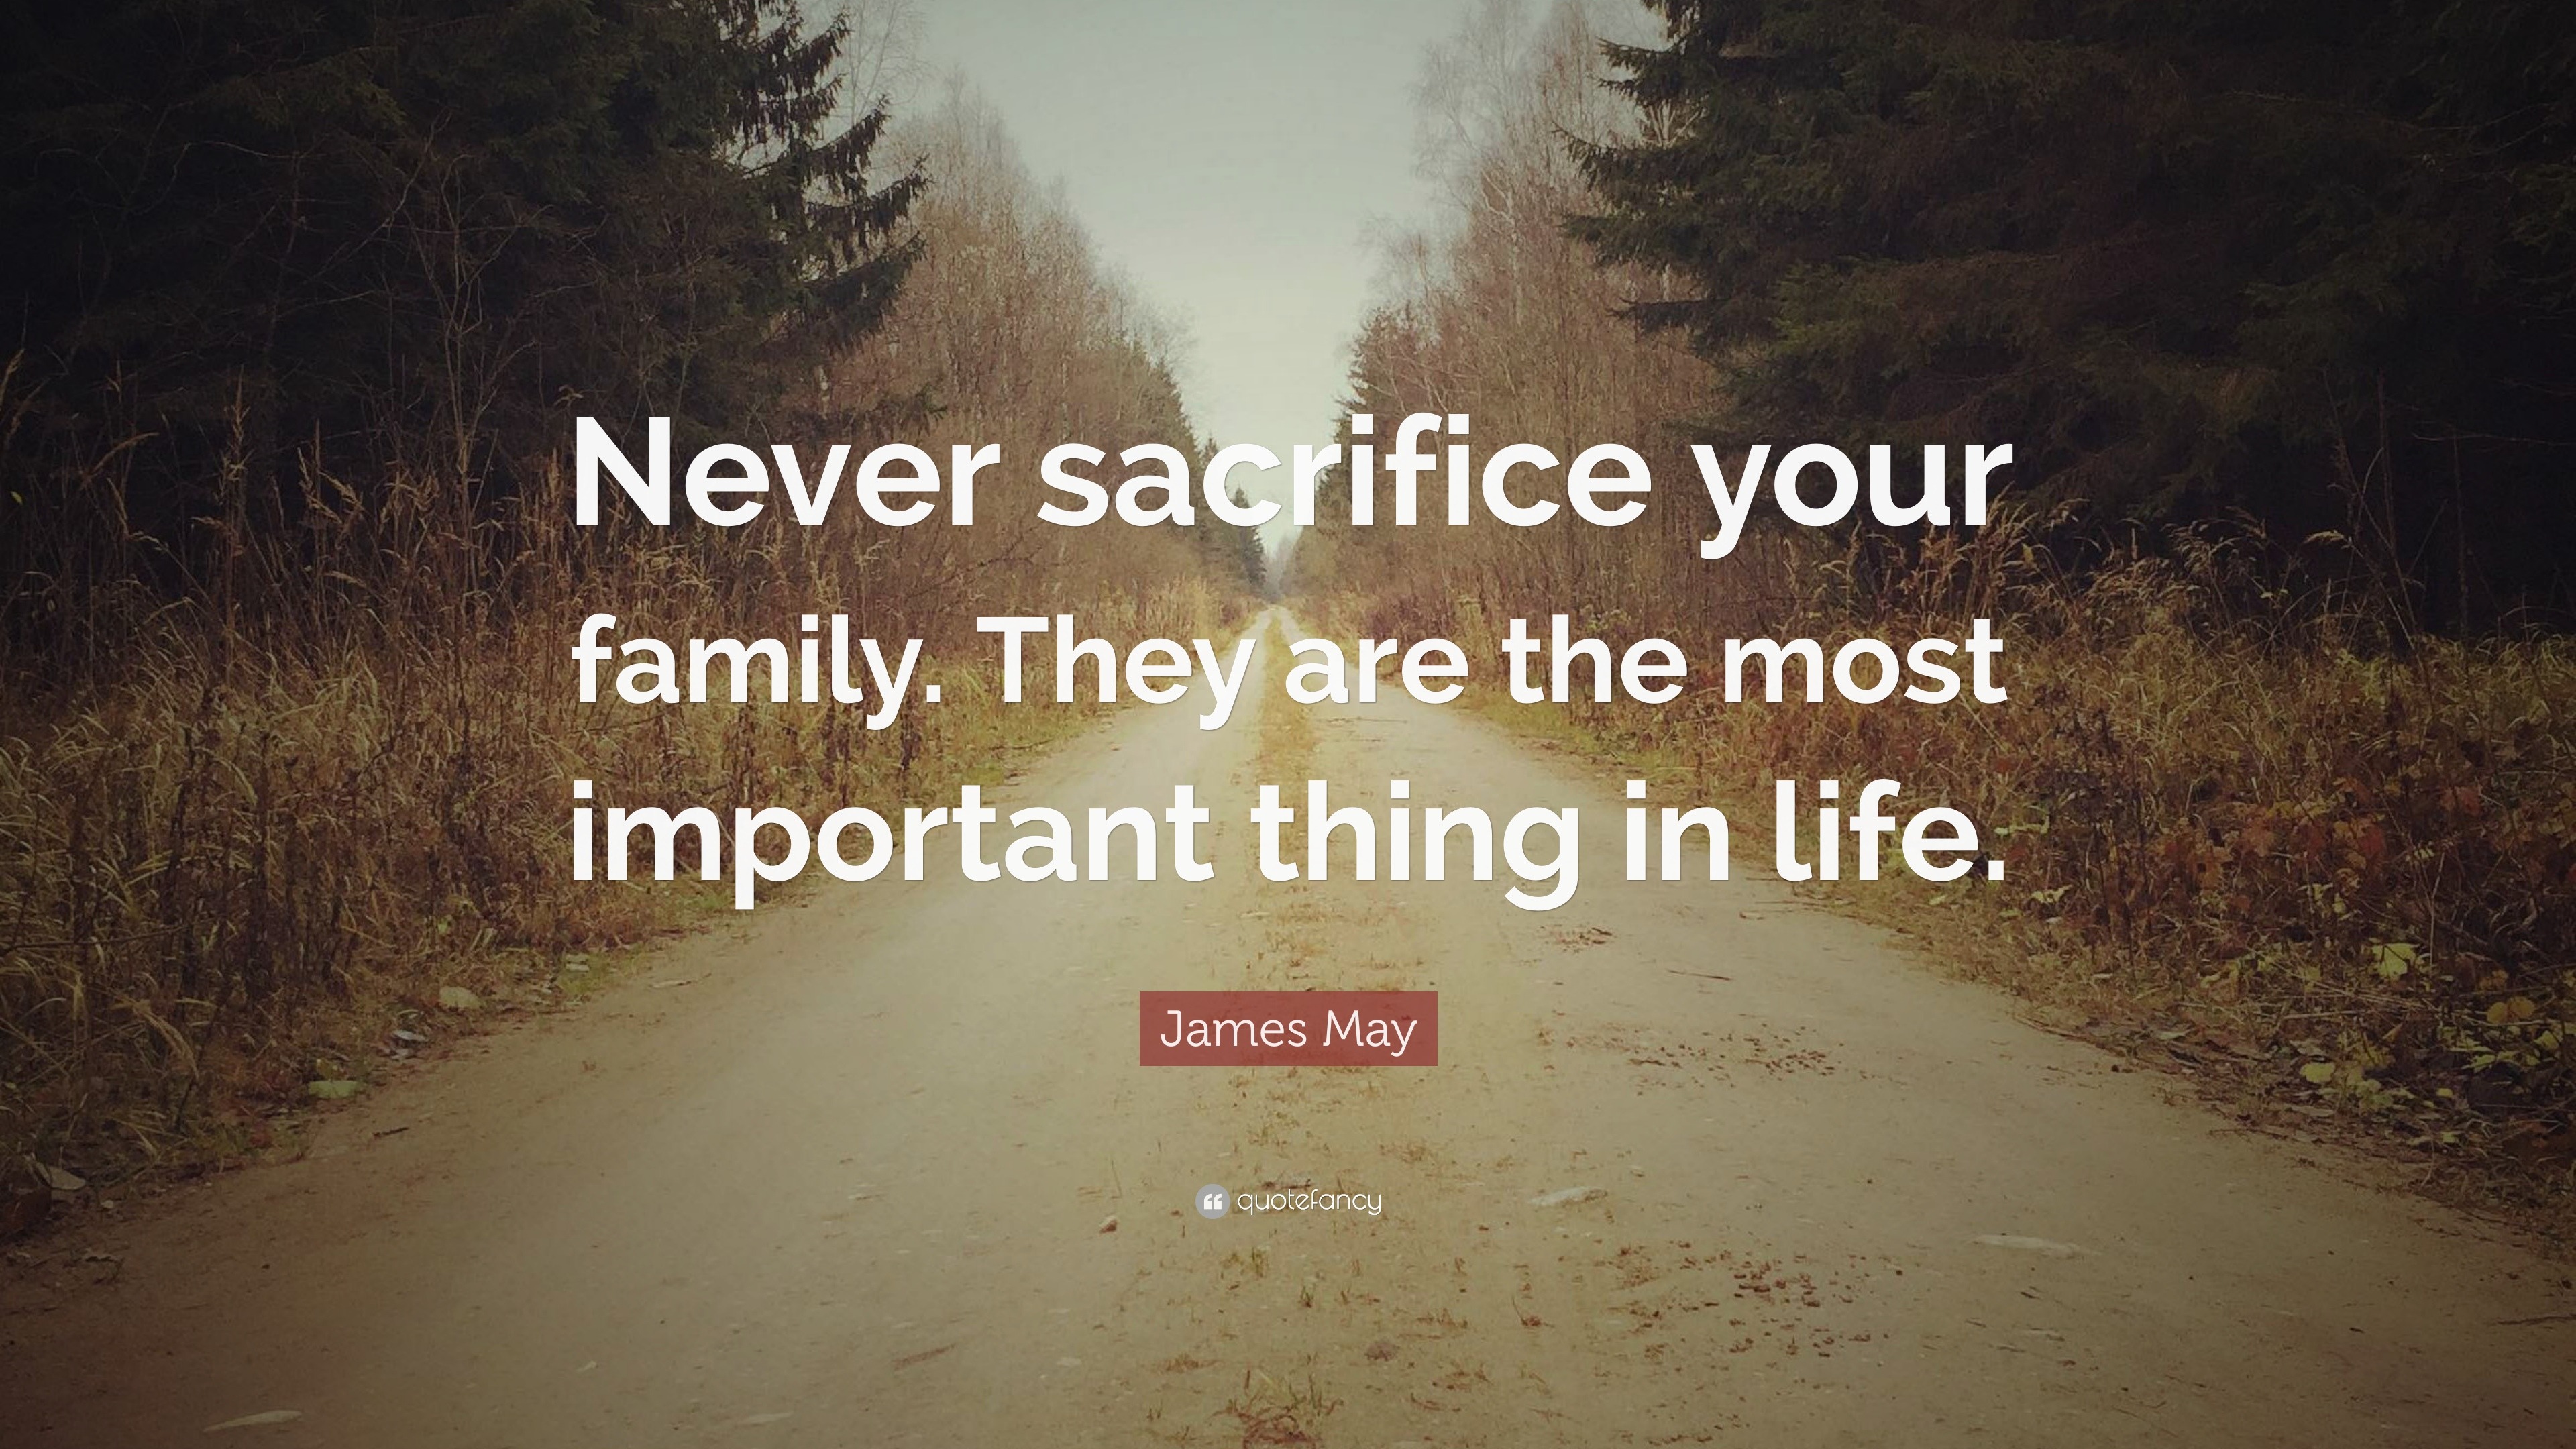 James May Quote Never Sacrifice Your Family They Are The Most Important Thing In Life